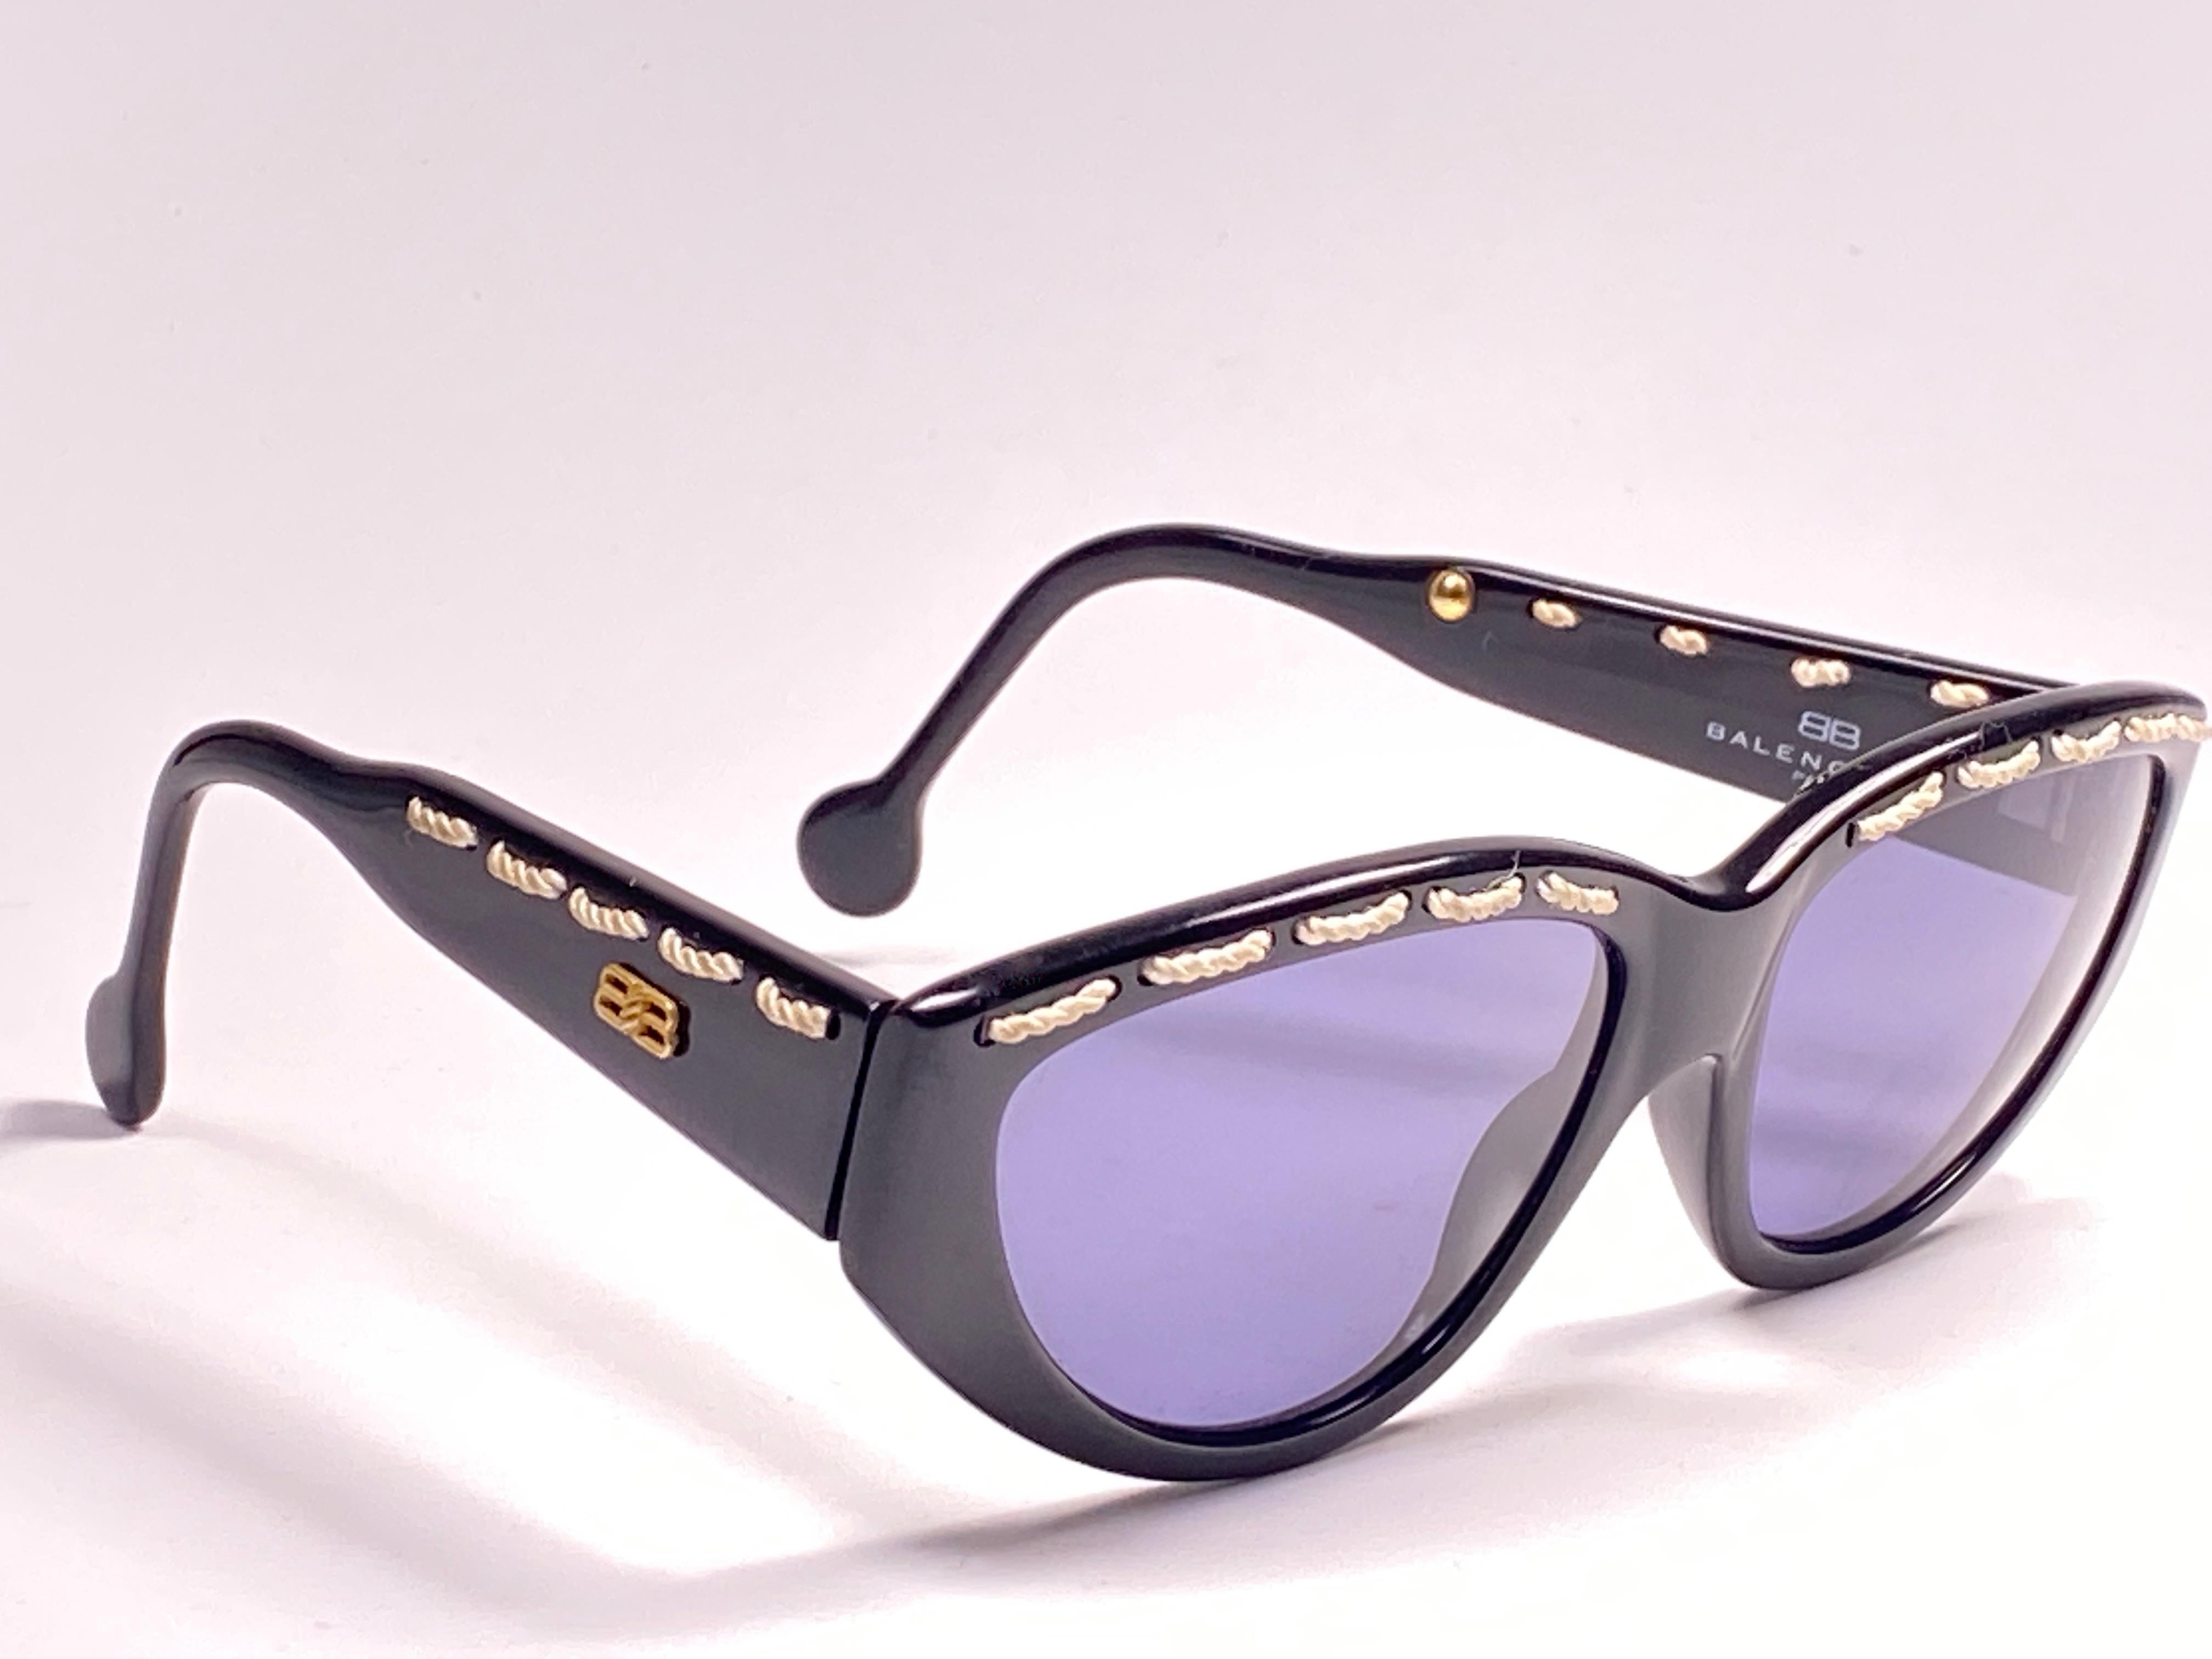 Vintage Balenciaga sleek black with white rope accents frame holding a spotless pair of grey lenses.

This pair could show minor sign of wear due to storage.

Designed and produced in France.